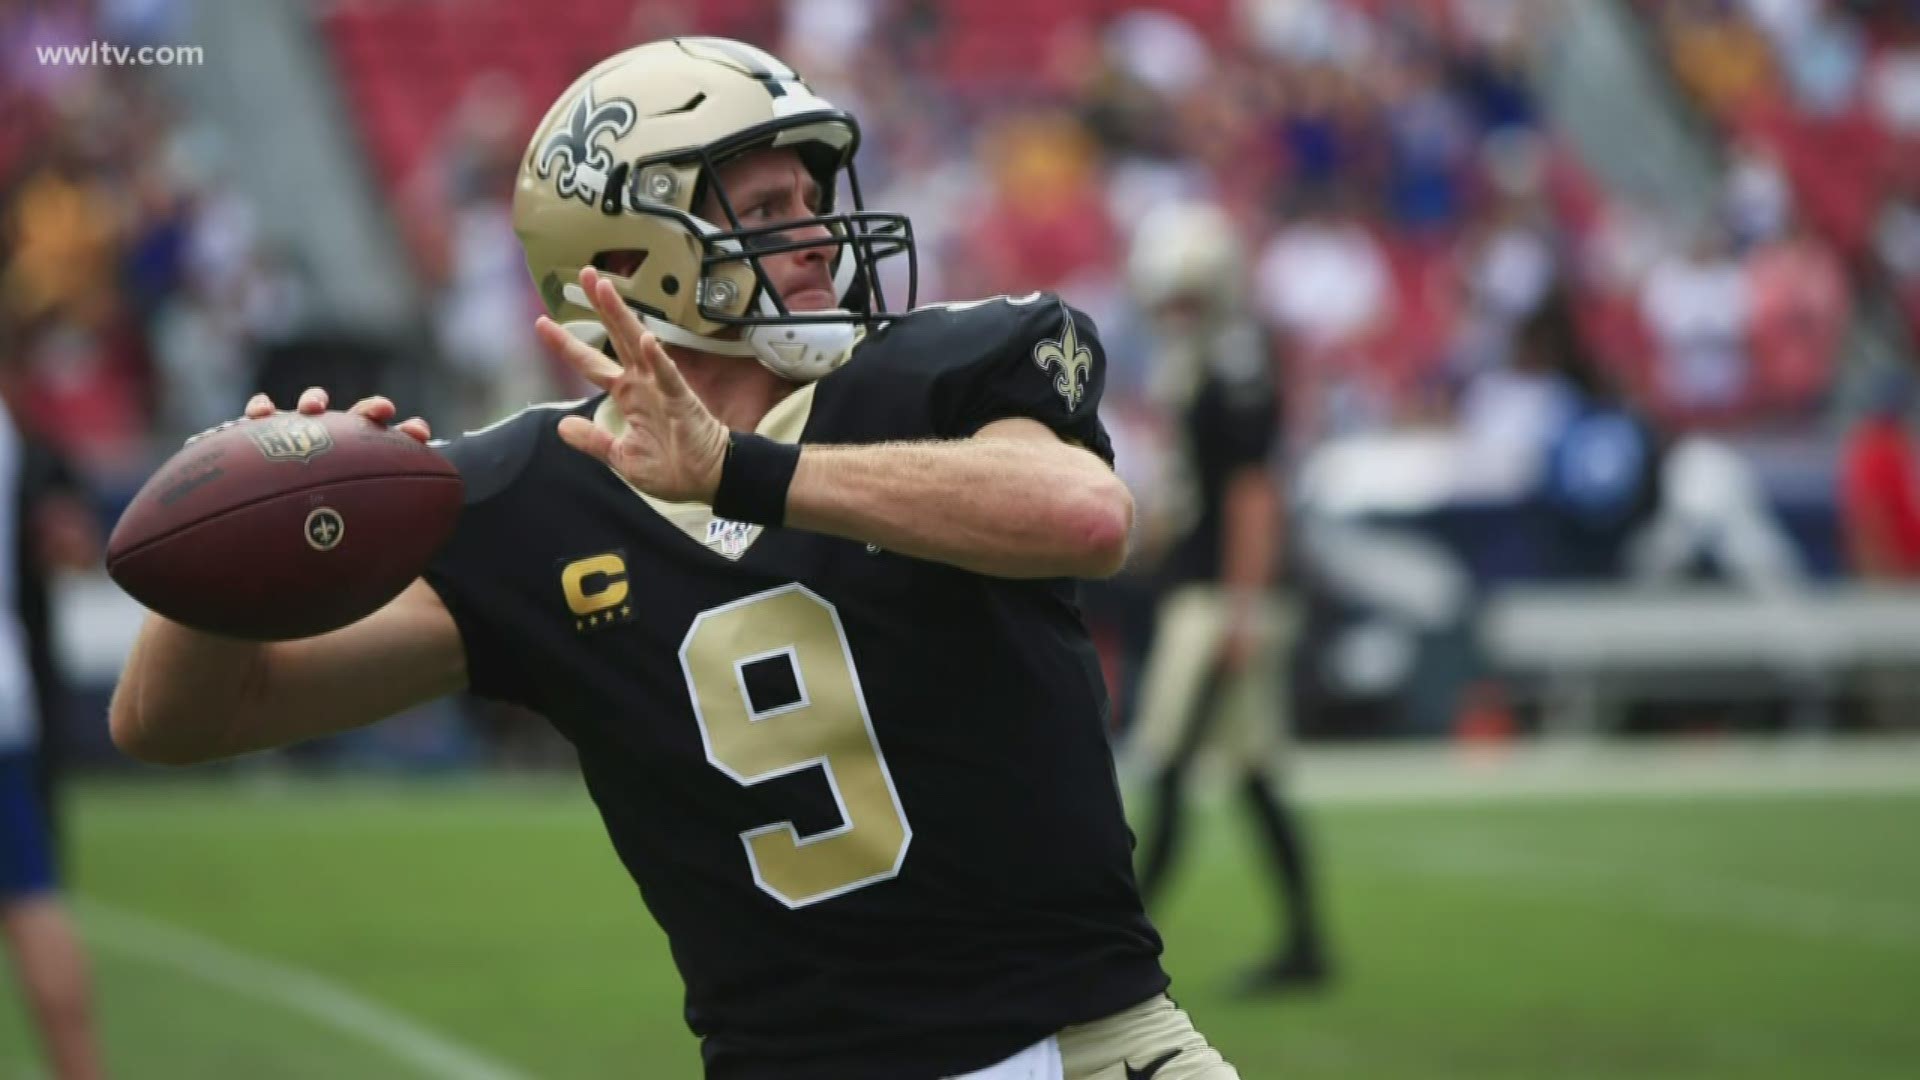 WWL-TV medical reporter Meg Farris looks at what's medically behind the decision for quarterback Drew Brees to return.